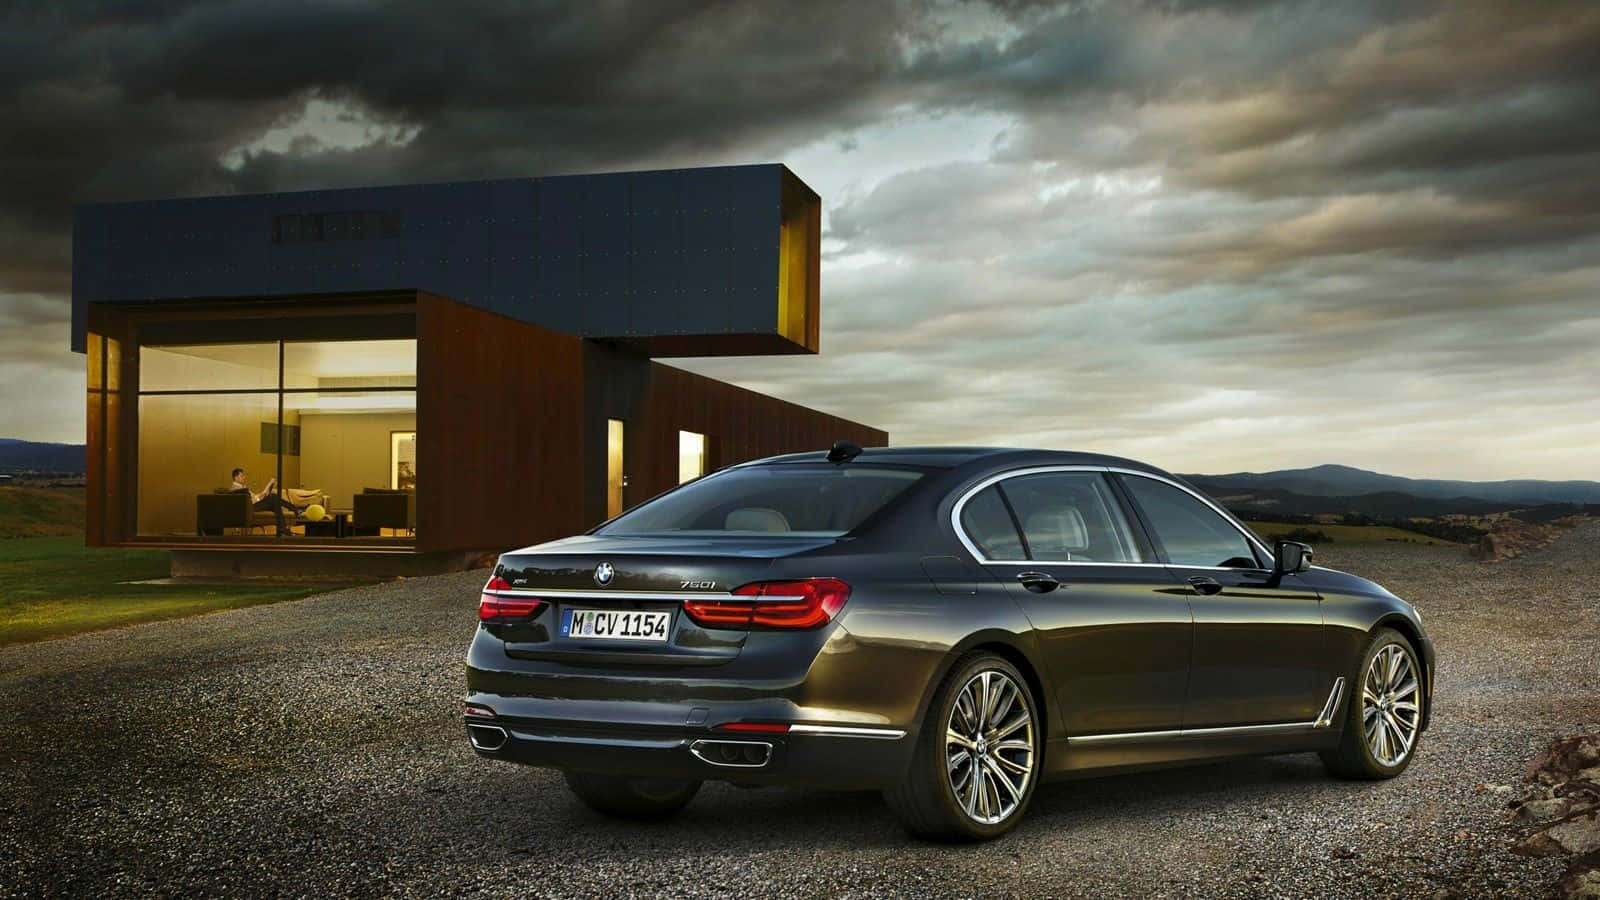 Captivating BMW 7 Series in Motion Wallpaper